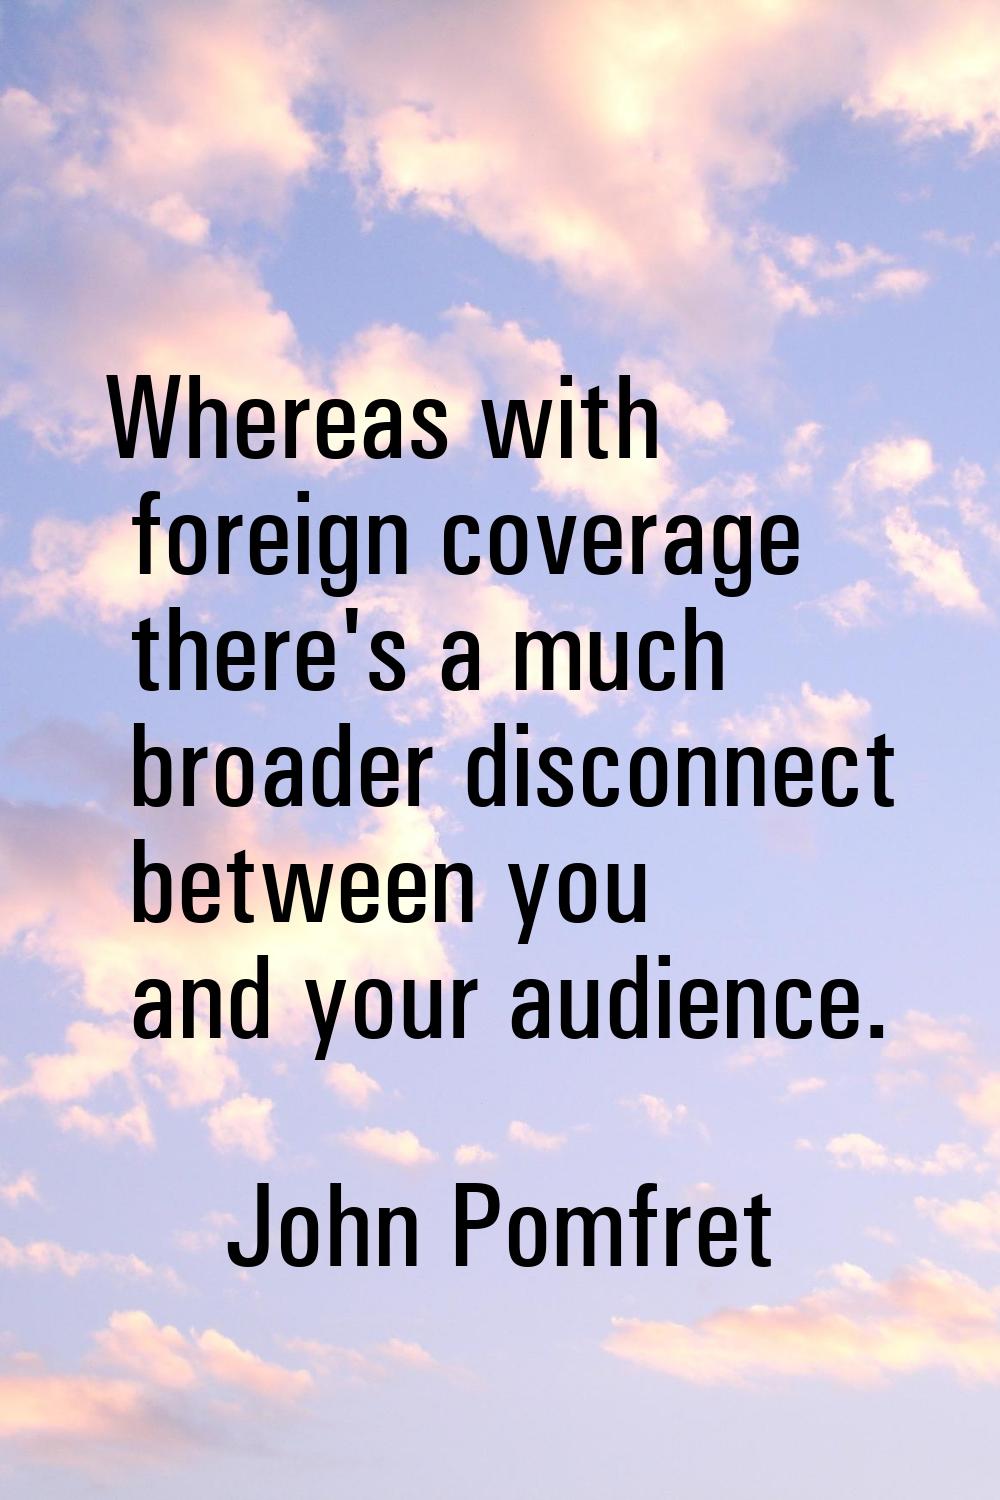 Whereas with foreign coverage there's a much broader disconnect between you and your audience.